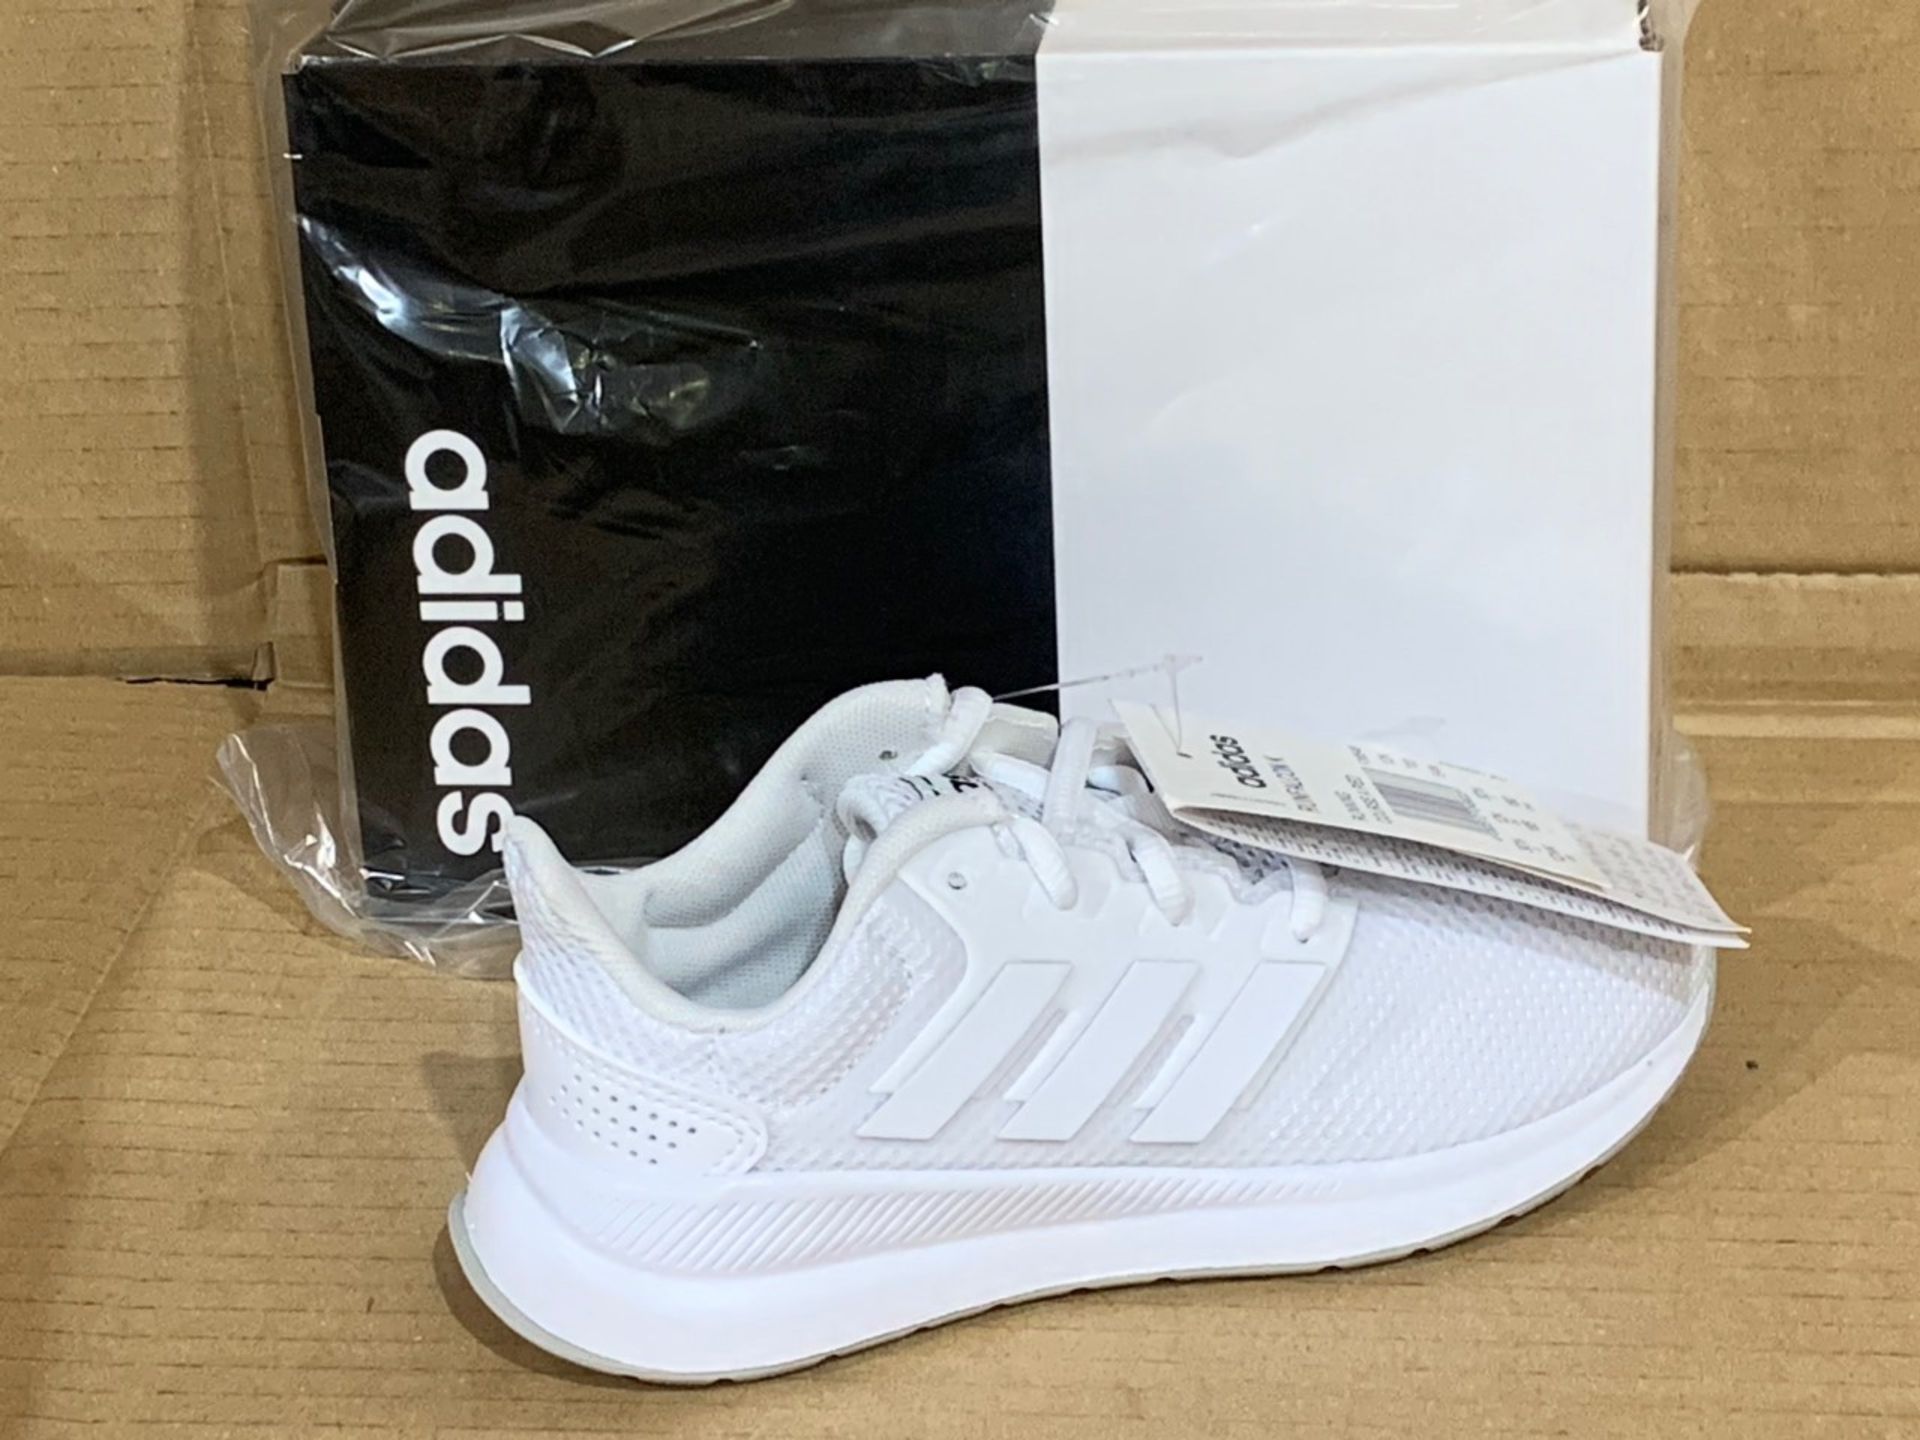 (NO VAT) 3 X NEW BOXED PAIRS OF ADDIDAS TRAINERS SIZE UK INFANT 12